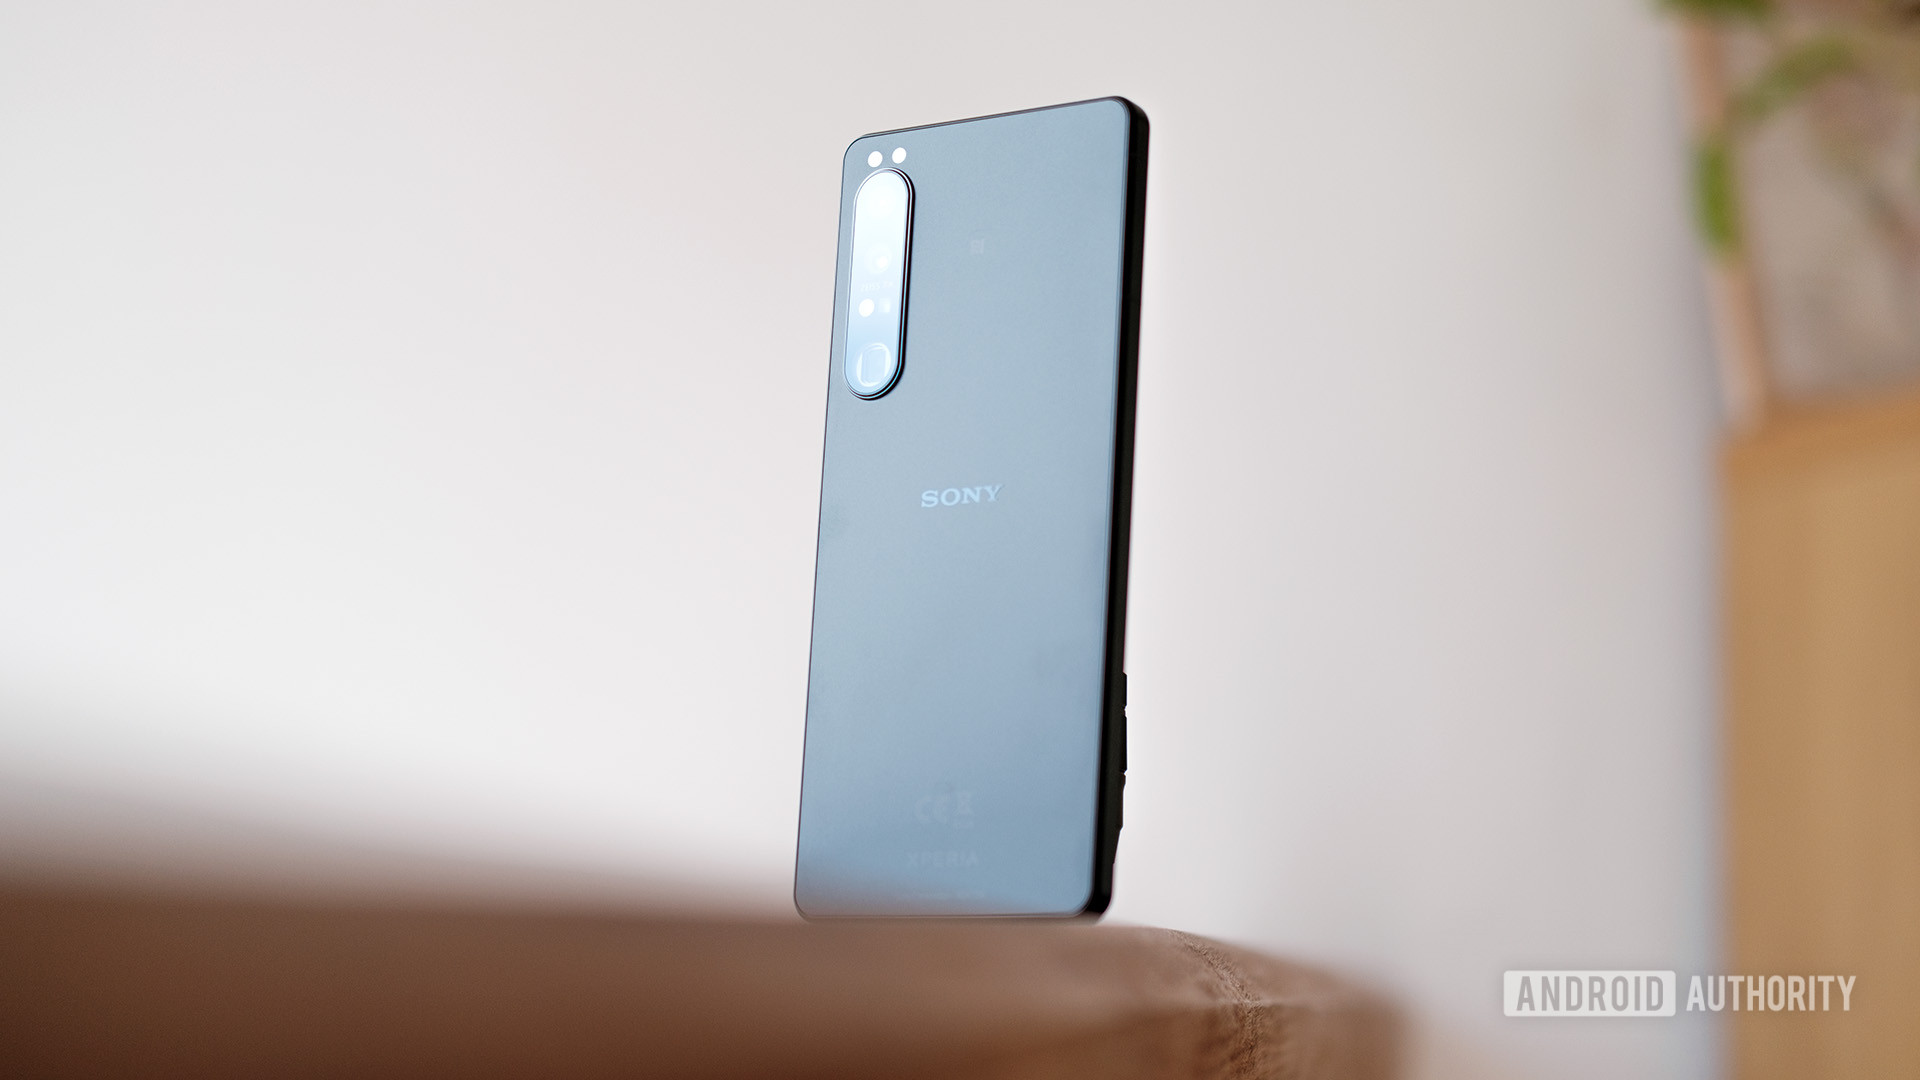 Sony Xperia 1 IV buyer's guide: What you need to know